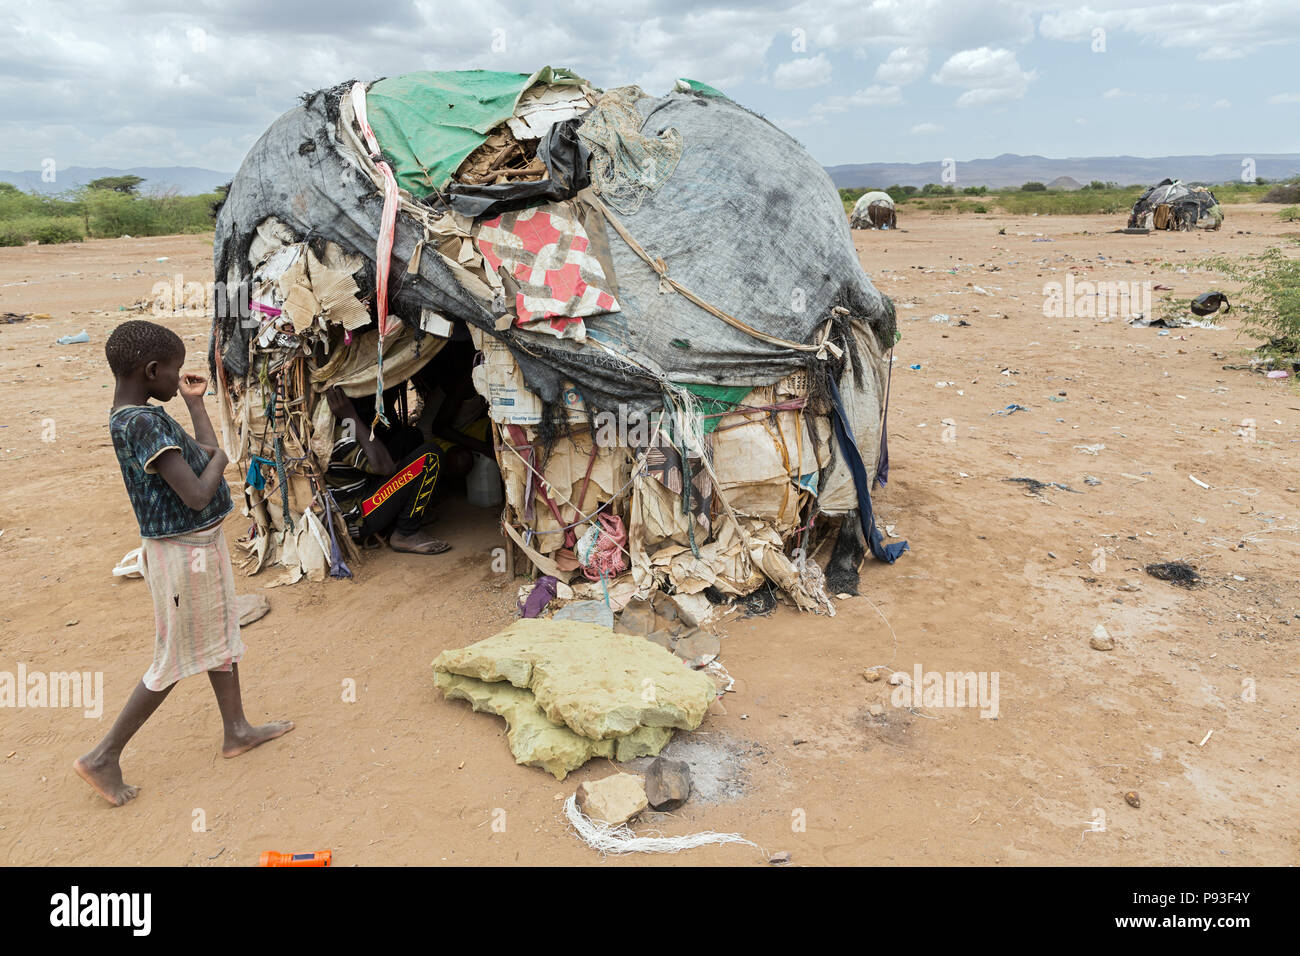 Kakuma, Kenya - On the edge of the refugee camp Kakuma. A girl is standing in front of a hut covered with old plastic tarpaulins, blankets, boxes and garbage. Stock Photo